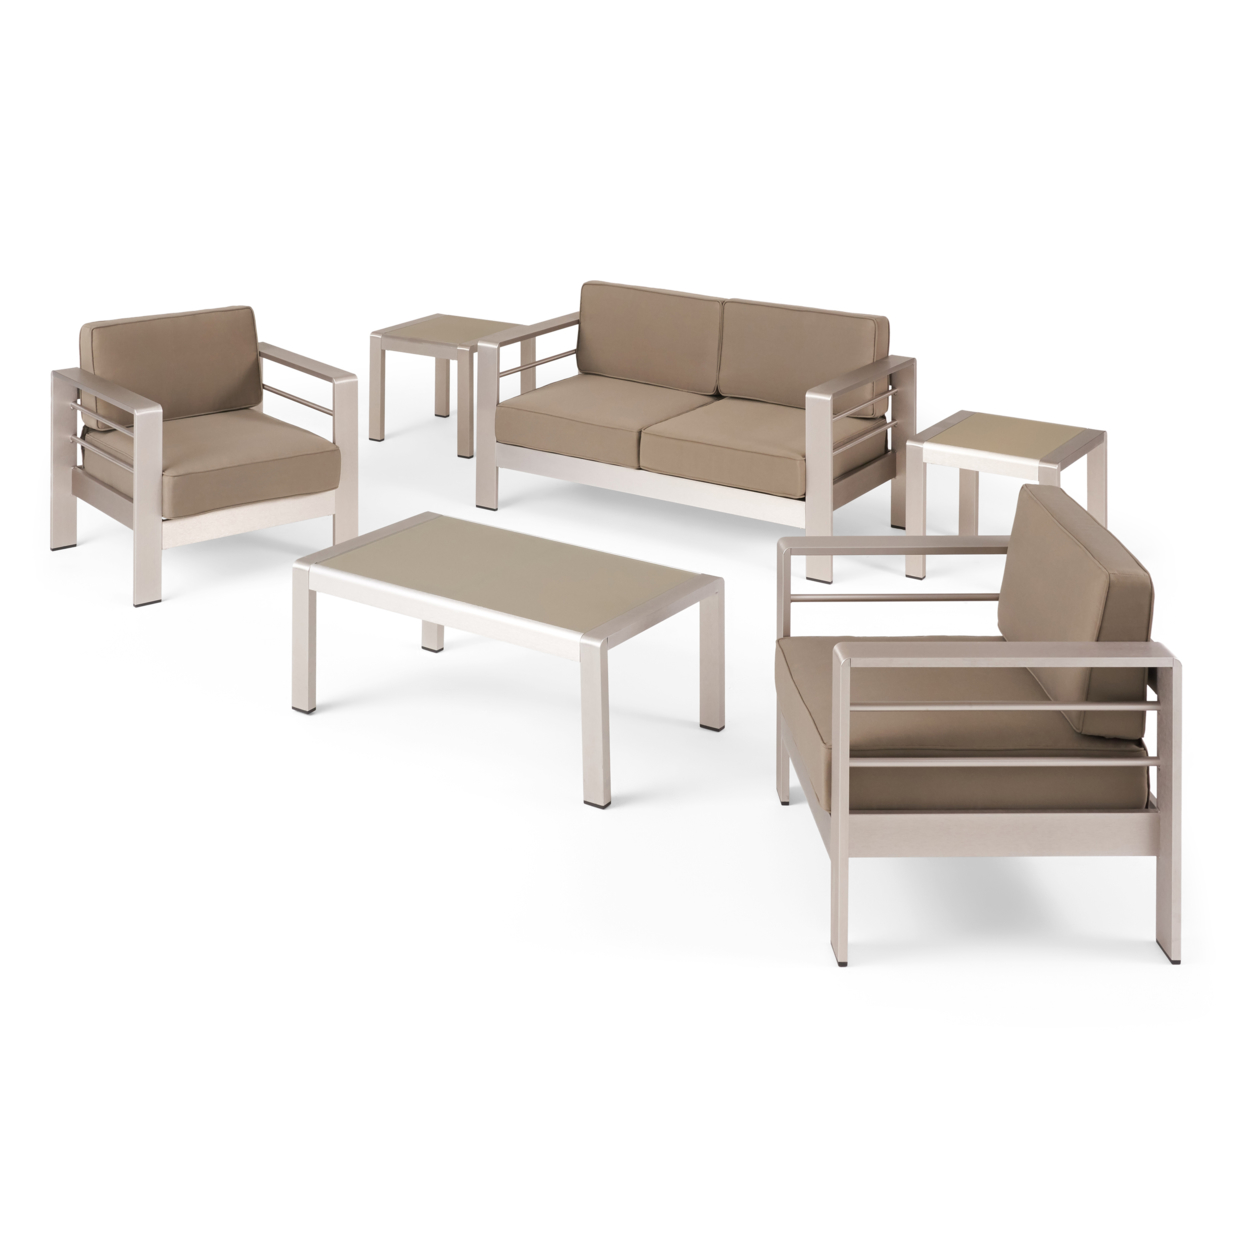 Snowy Coral Outdoor 4 Seater Aluminum Chat Set With 2 Side Table - Silver, Khaki